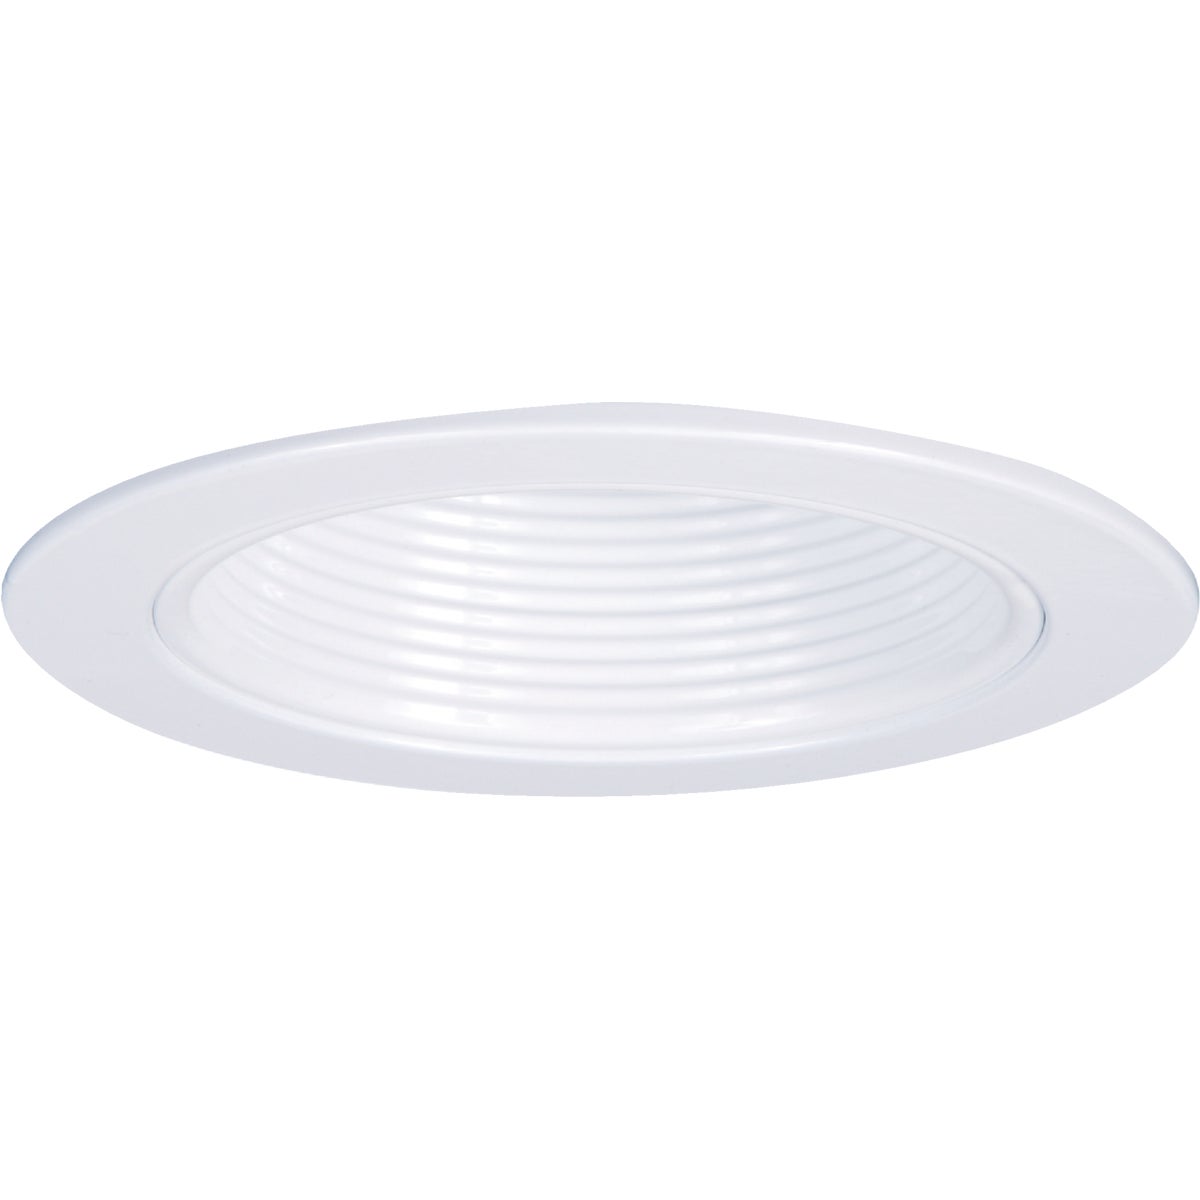 Item 502031, 4 inch step baffle trim ideal for use in recessed downlighting.